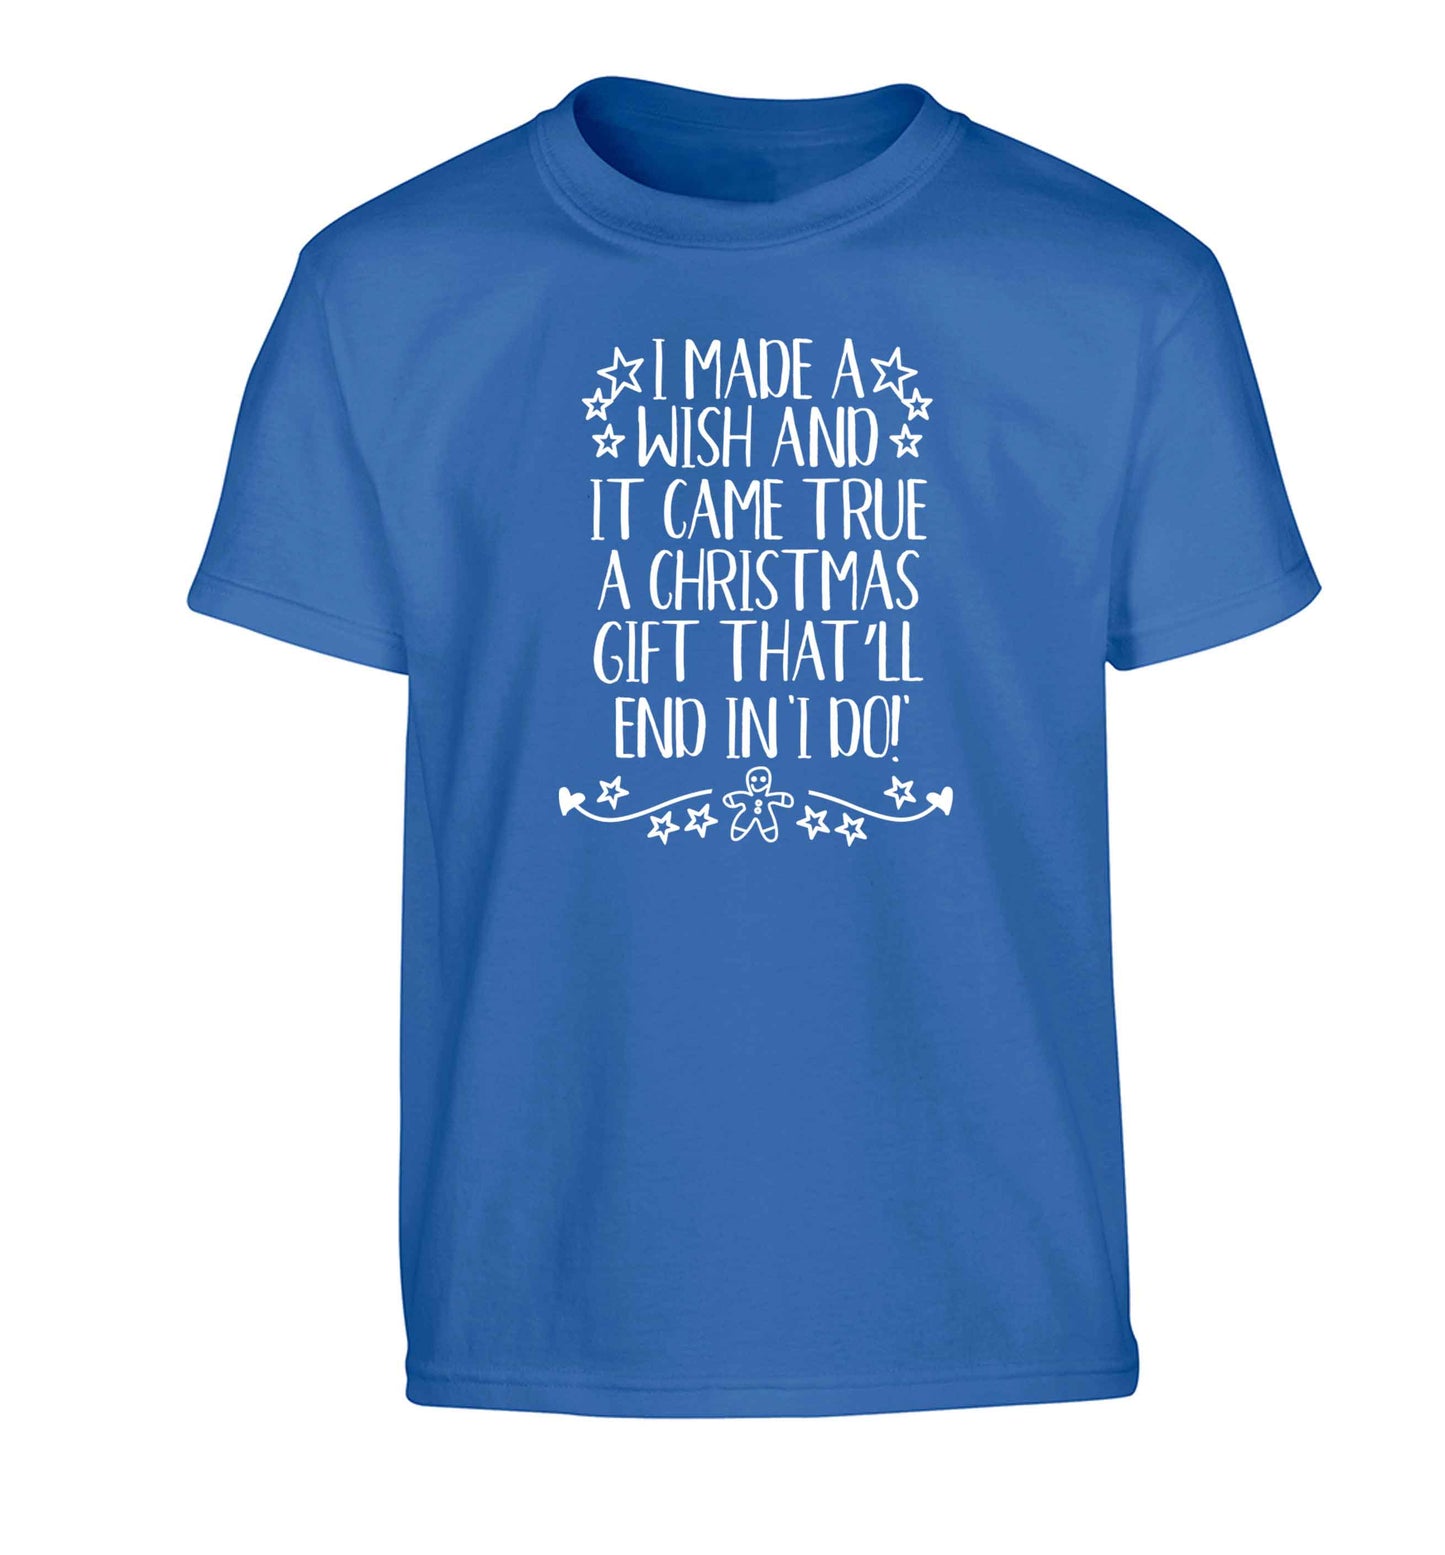 I made a wish and it came true a Christmas gift that'll end in 'I do' Children's blue Tshirt 12-13 Years